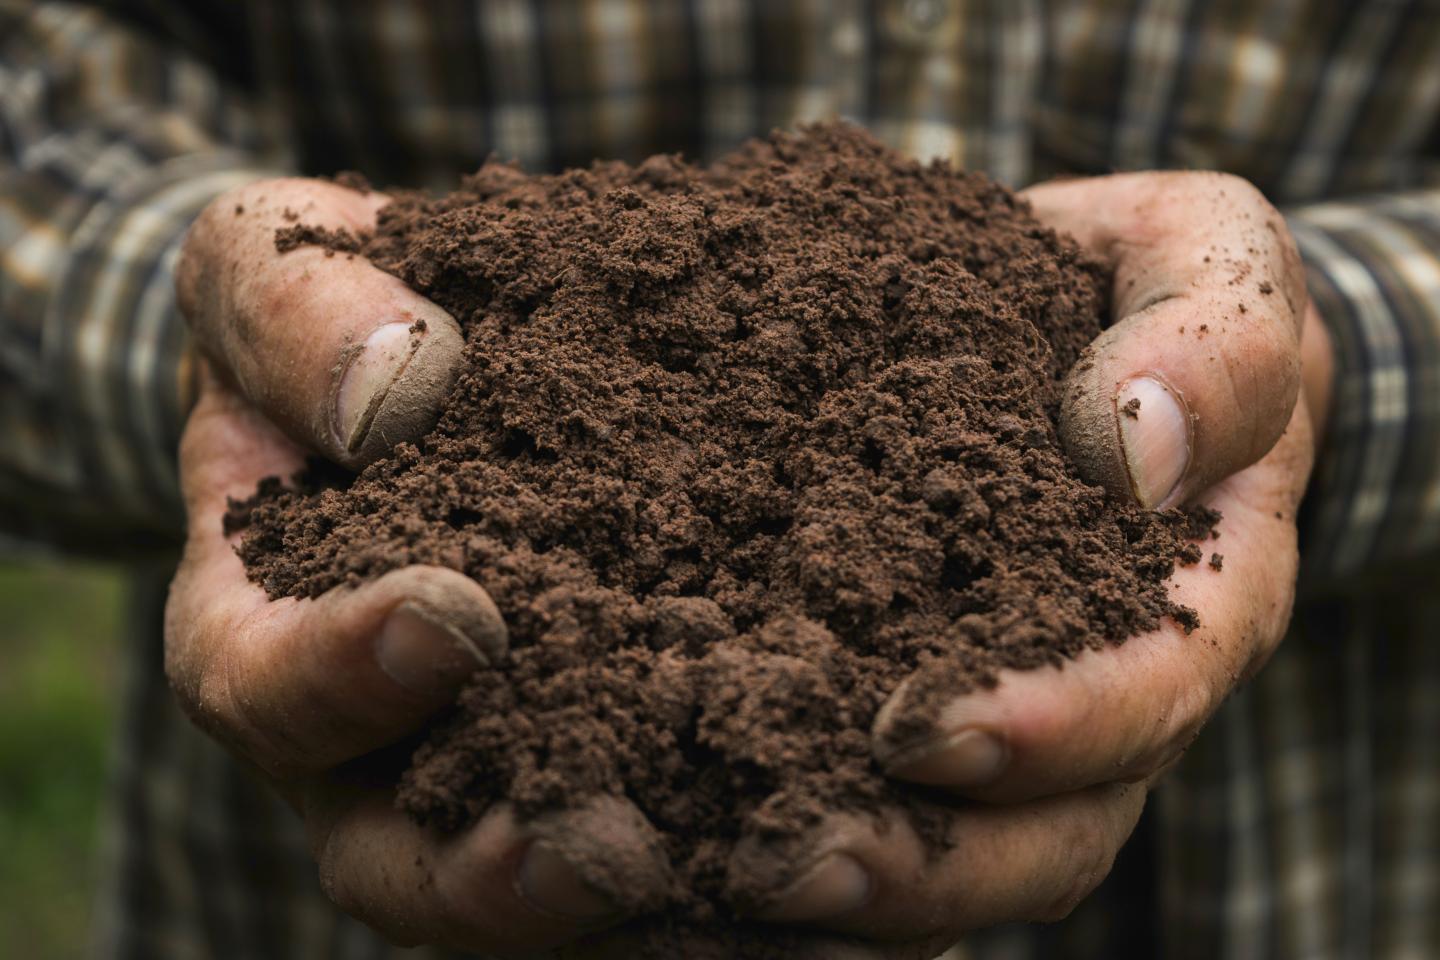 Person holding up handfuls of soil together in both hands